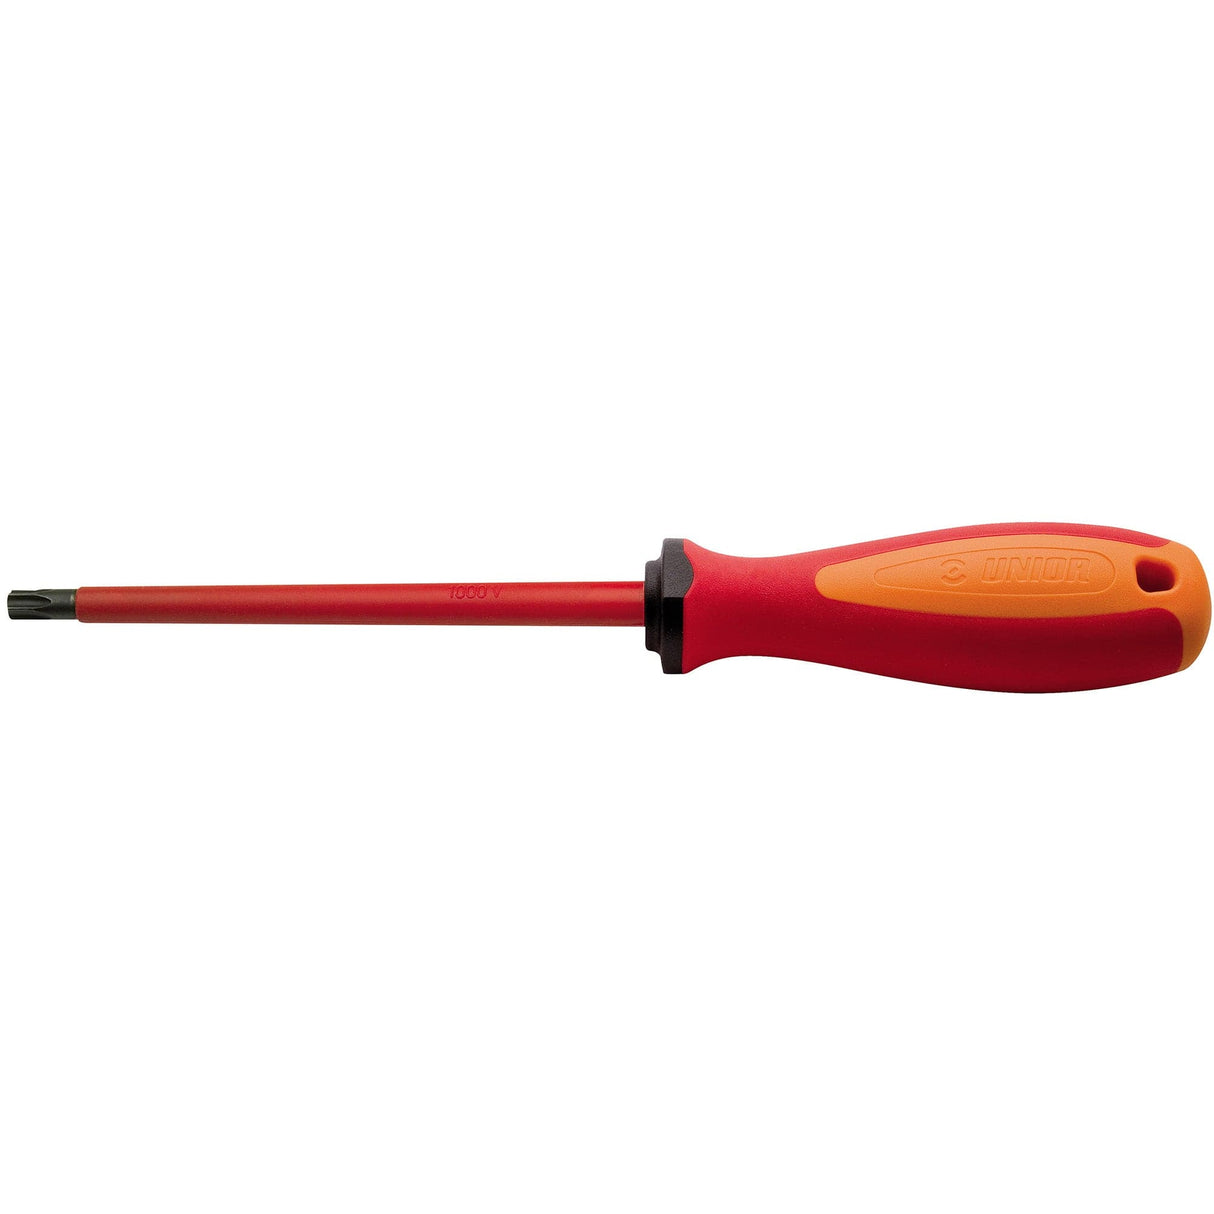 Unior Screwdriver Tbi With Tx Profile And Hole: Red Tr 20